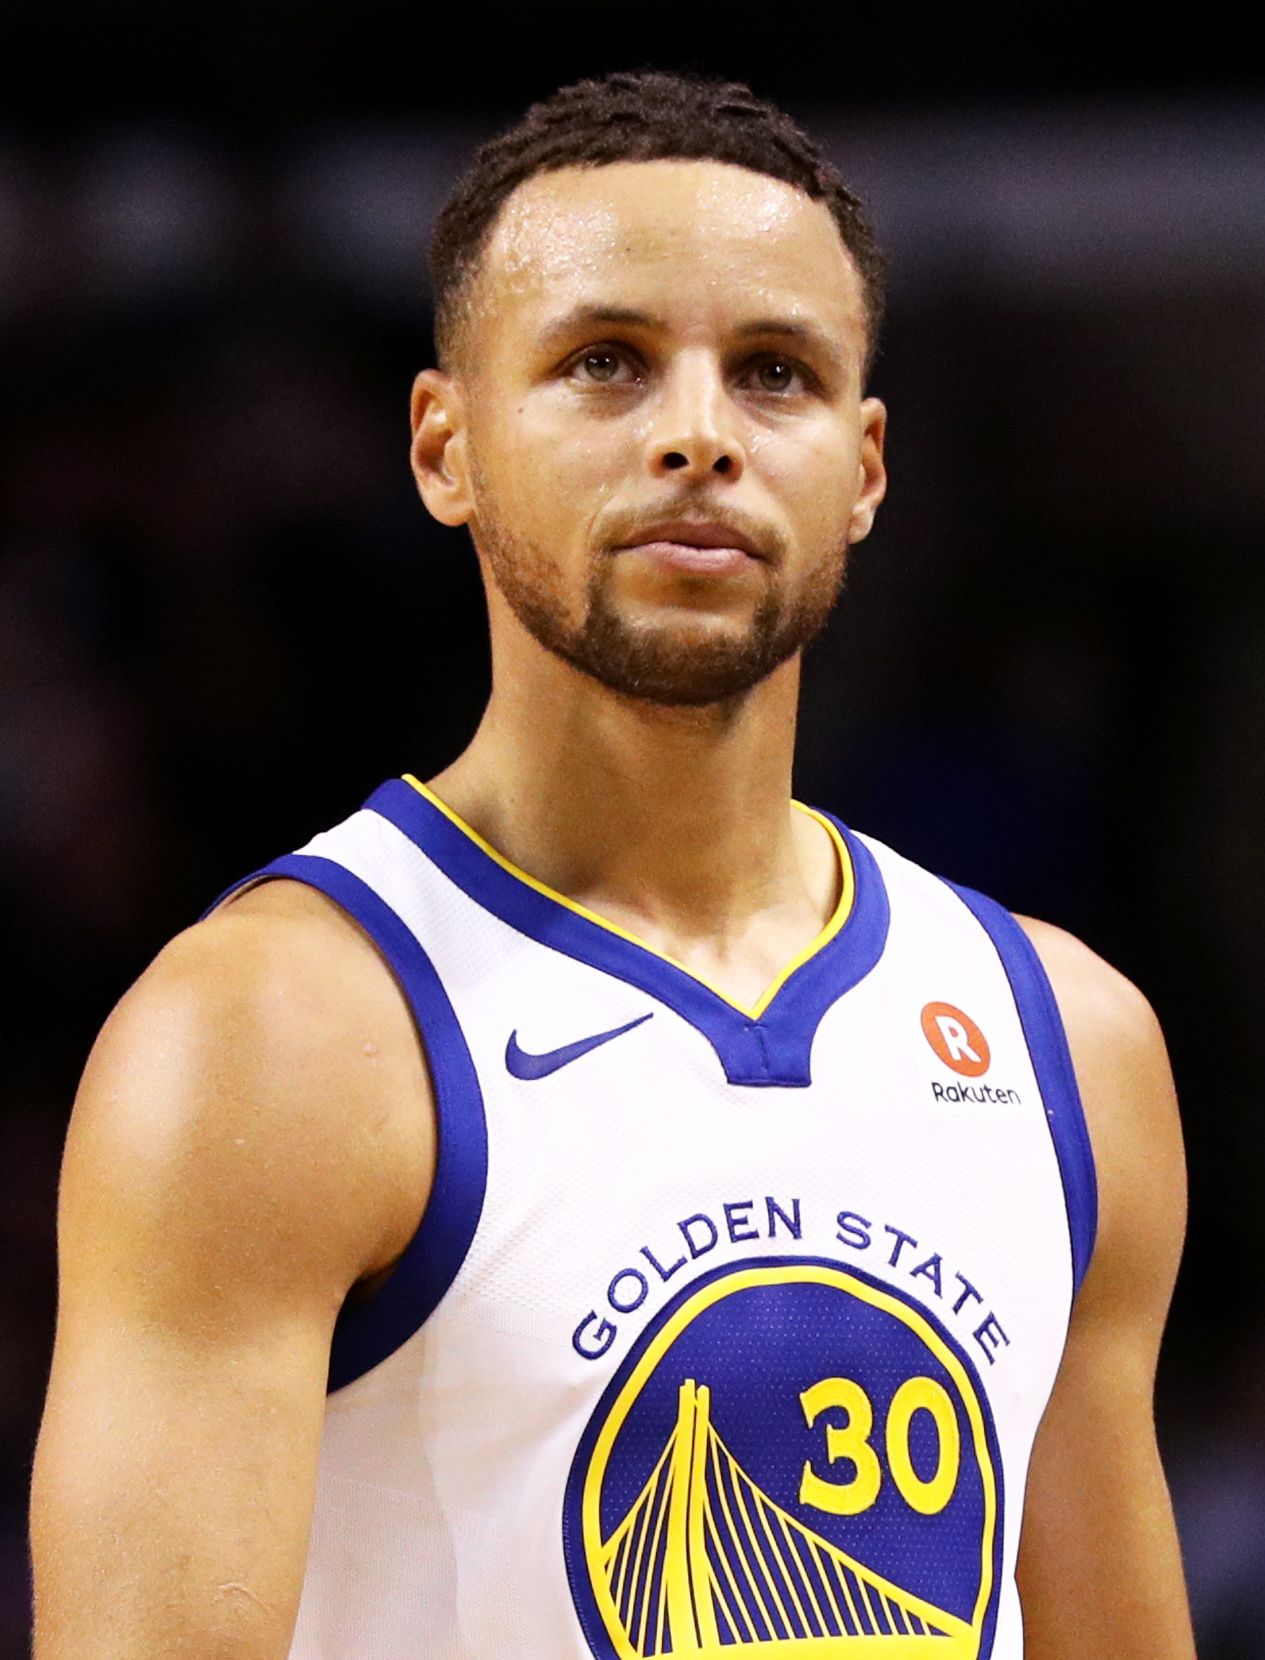 Stephen Curry of the Golden State Warriors during the second quarter against the Boston Celtics at TD Garden on November 16, 2017 in Boston, Massachusetts | Photo: Getty Images